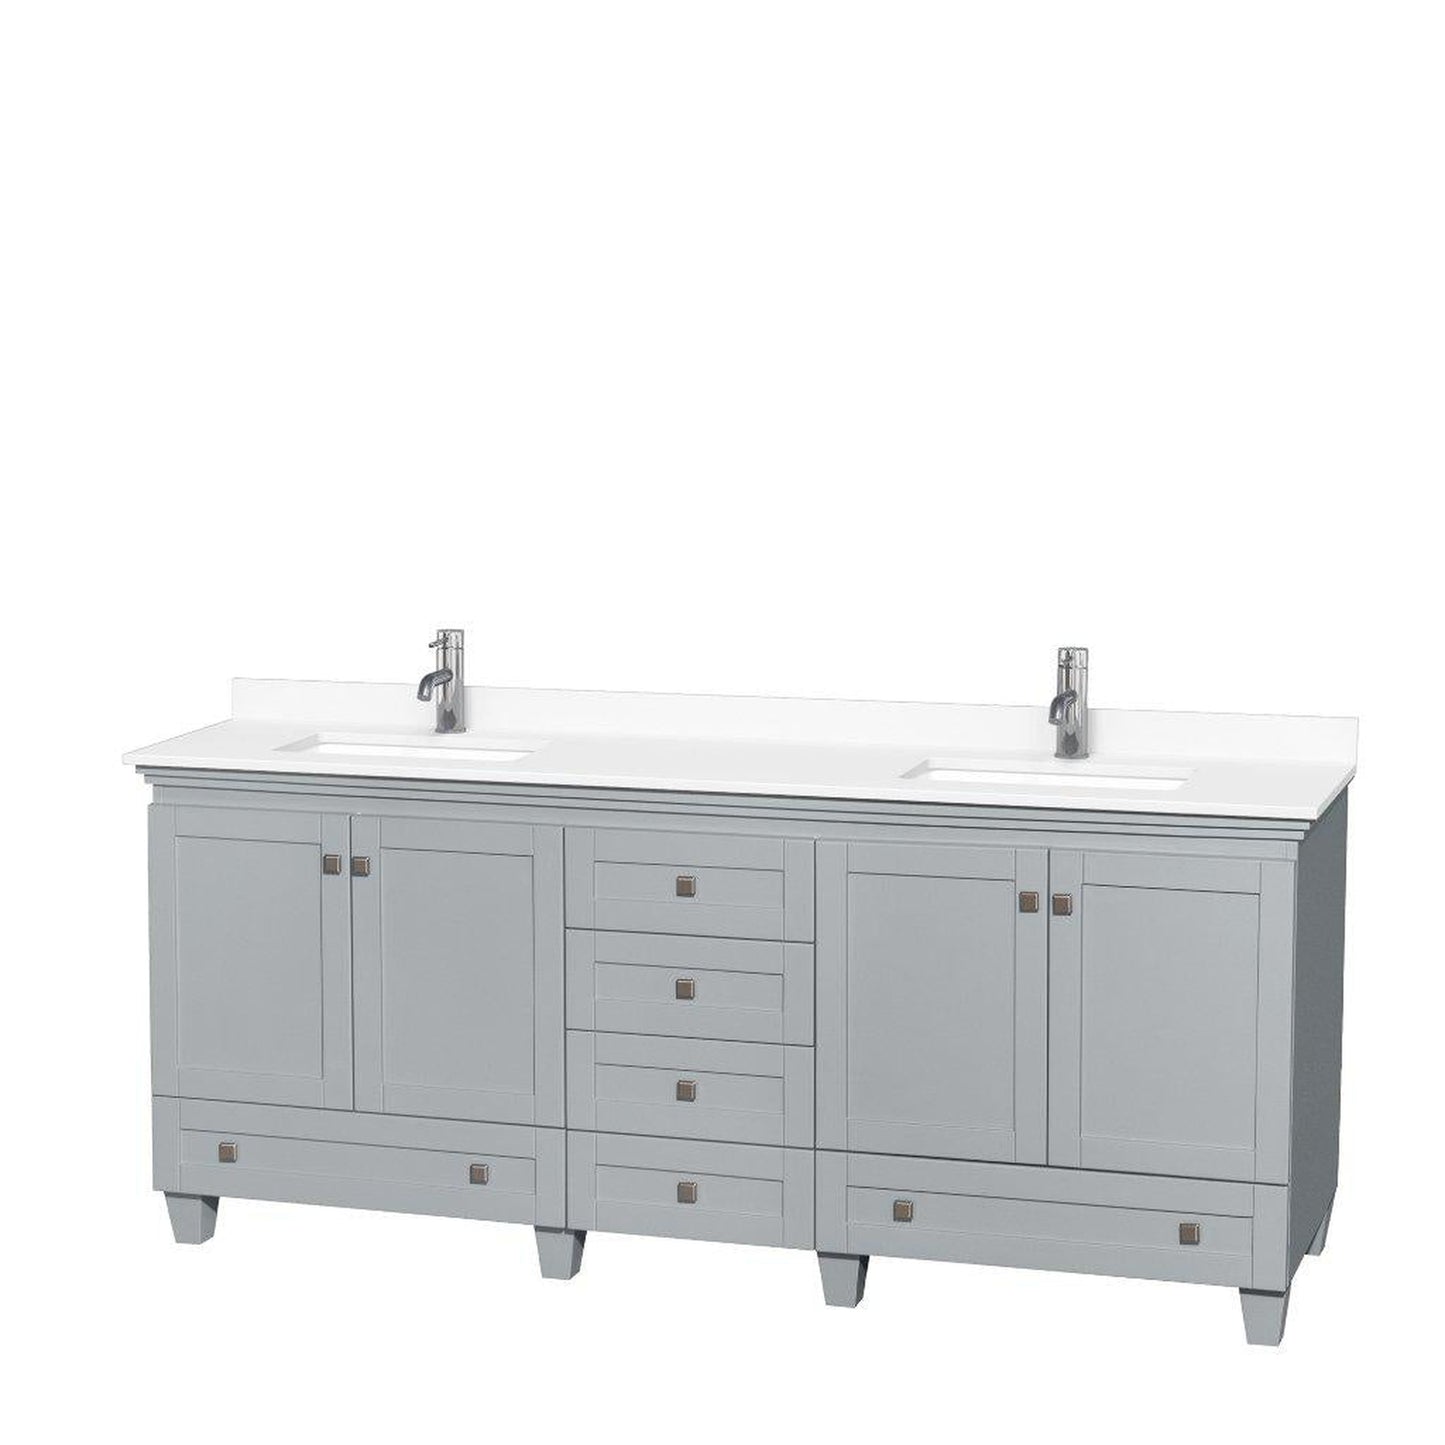 Wyndham Collection Acclaim 80" Double Bathroom Oyster Gray Vanity With White Cultured Marble Countertop And Undermount Square Sinks